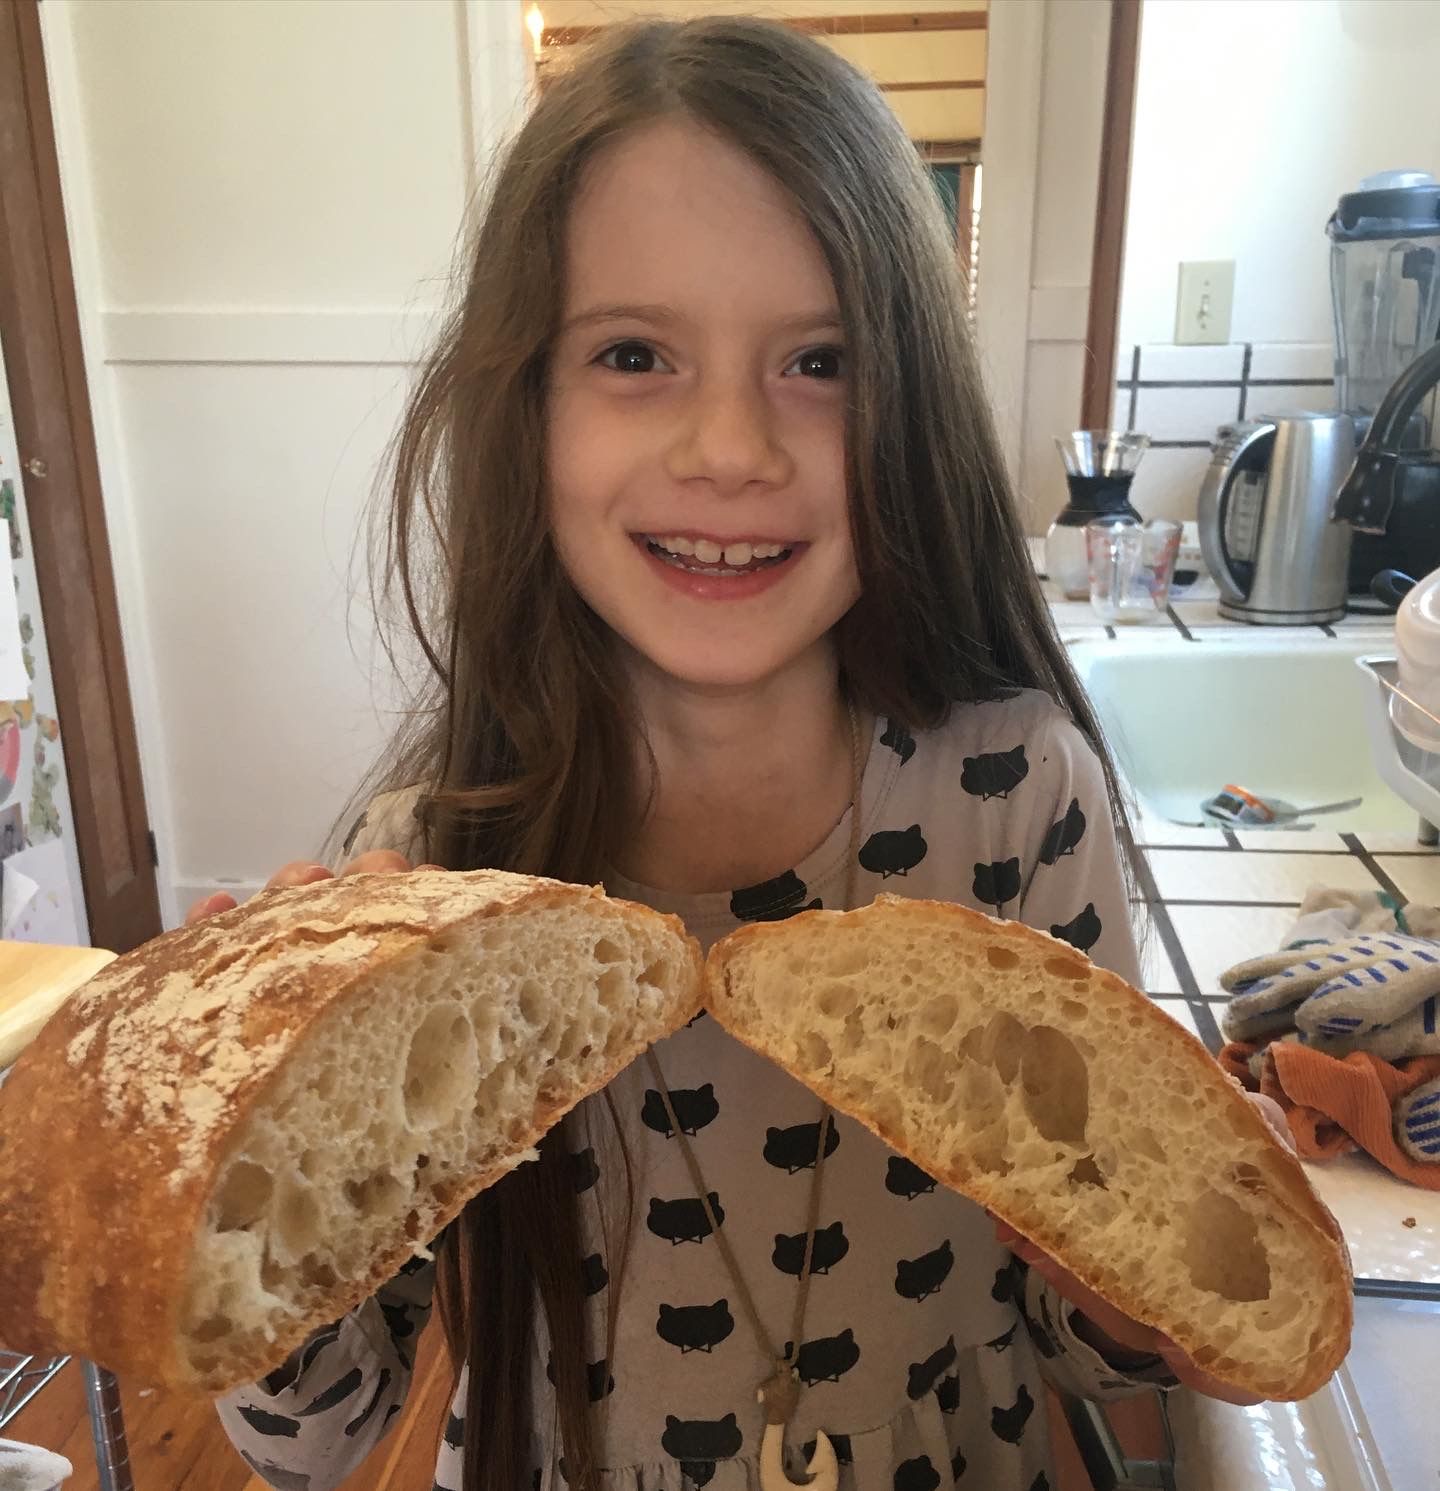 A beaming young girl is holding two halves of a sliced-open ciabatta loaf, exposing airy-textured bread inside.